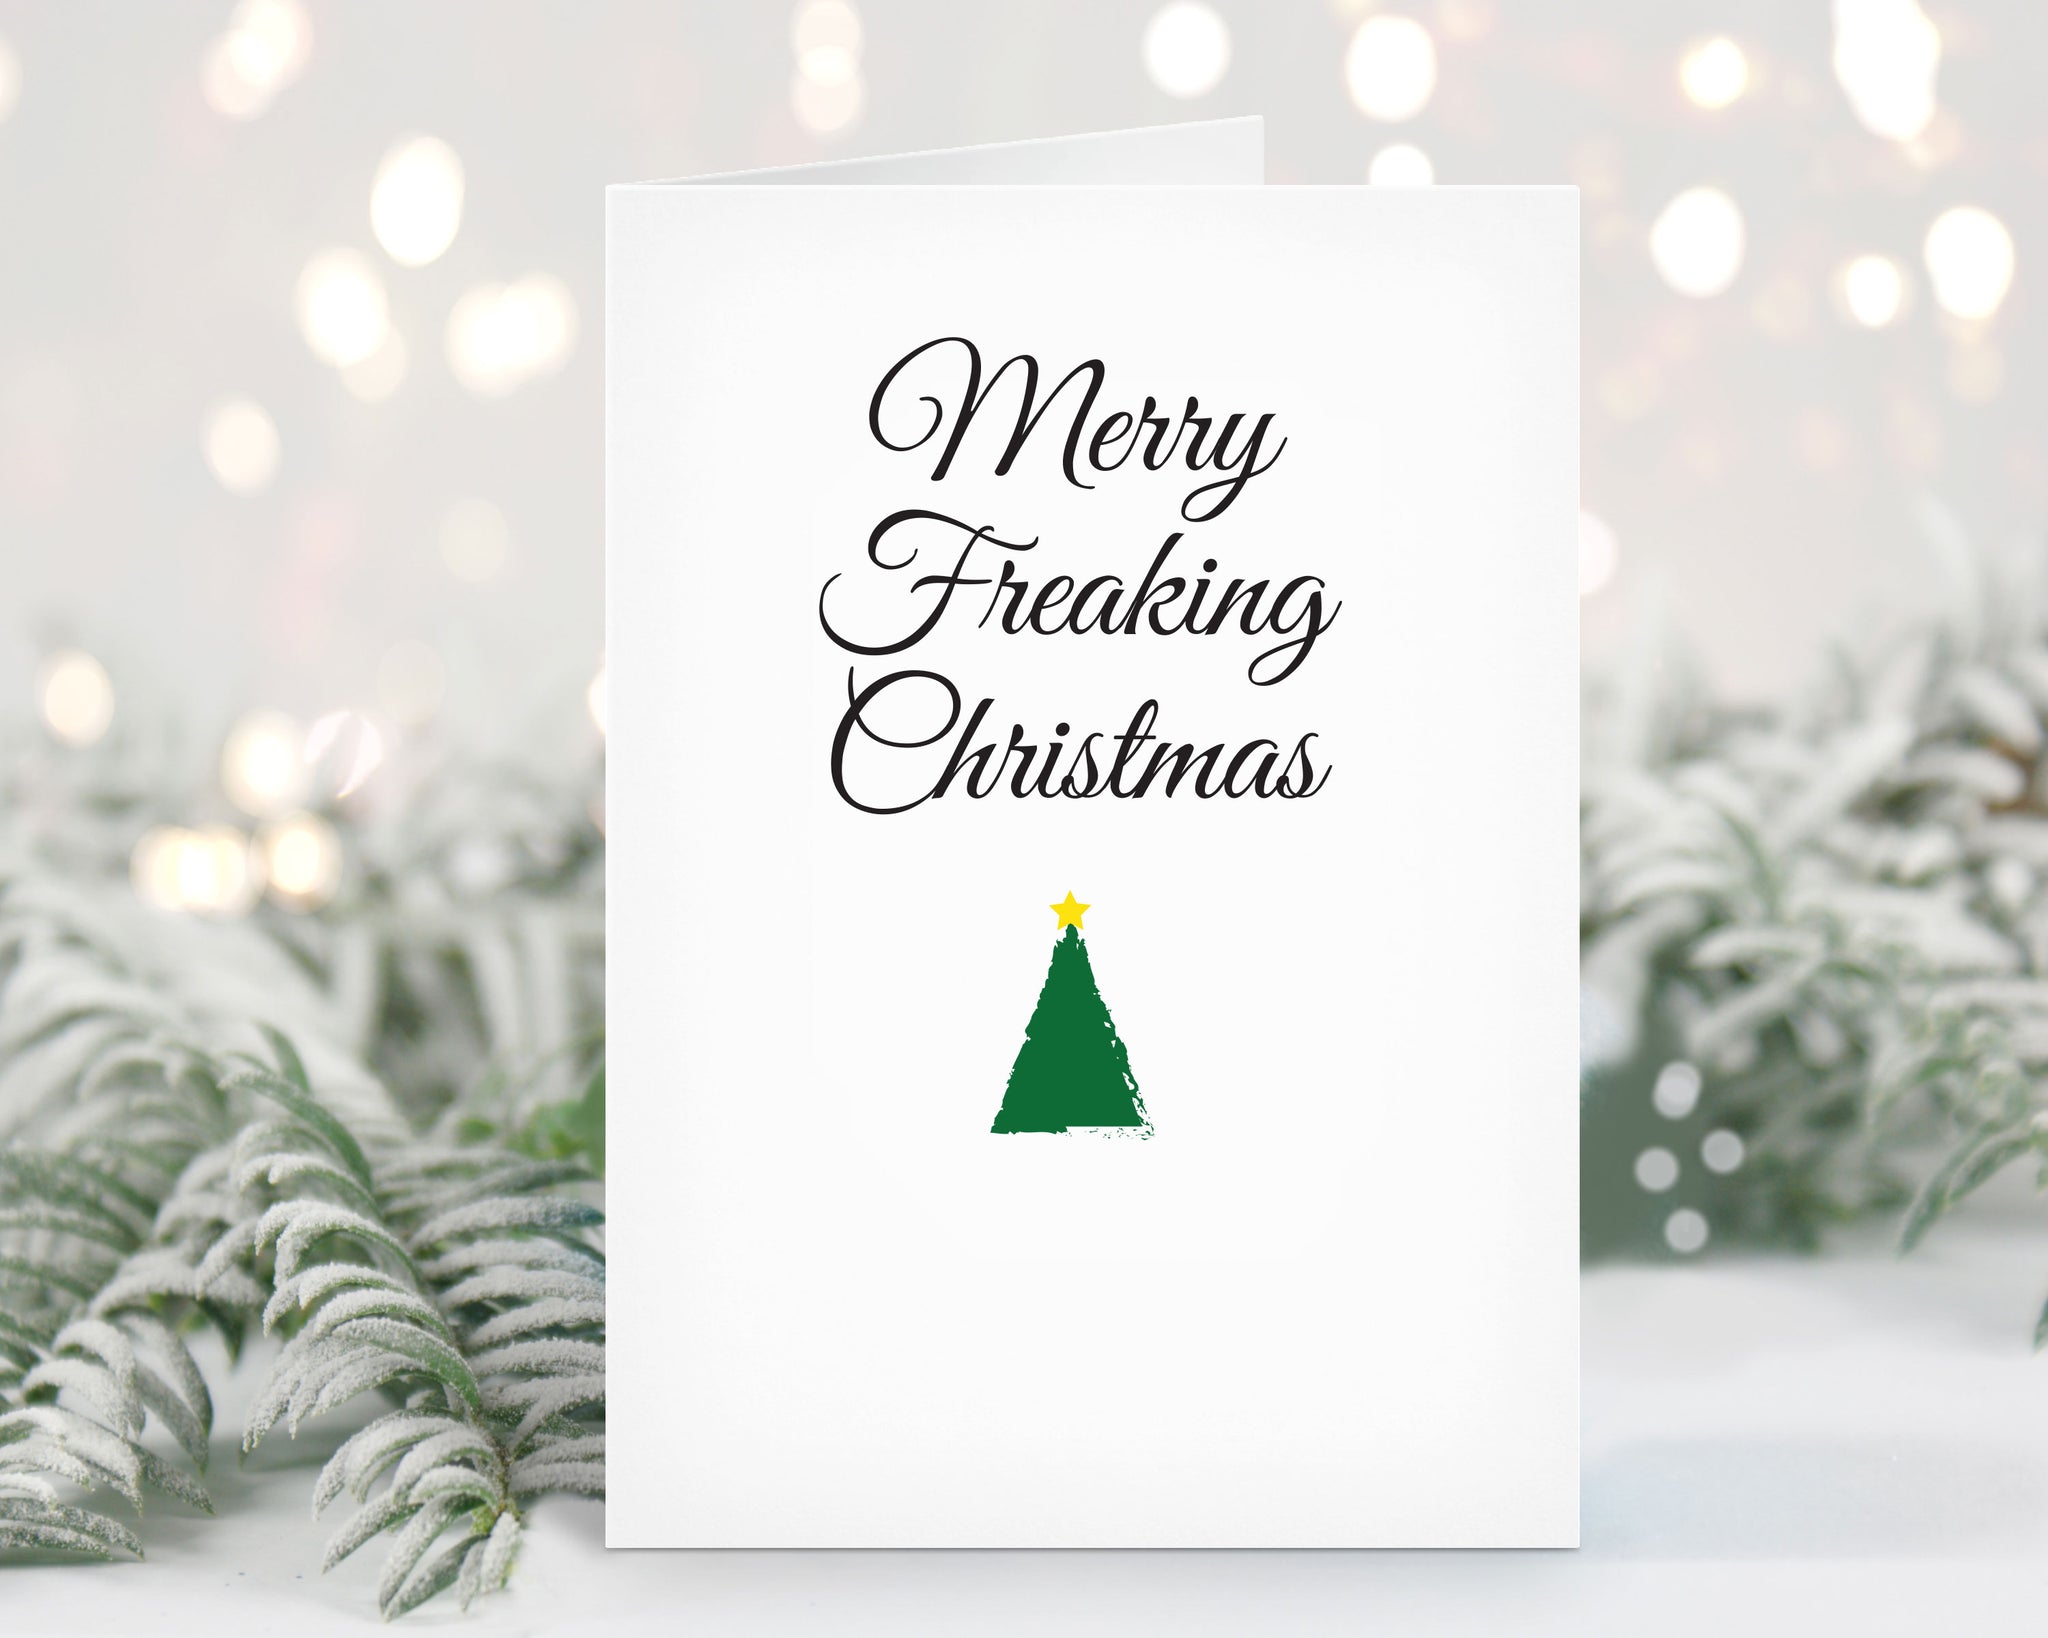 Merry Freaking Christmas, Christmas Card, Holidays Card, Snarky, Funny, Mature